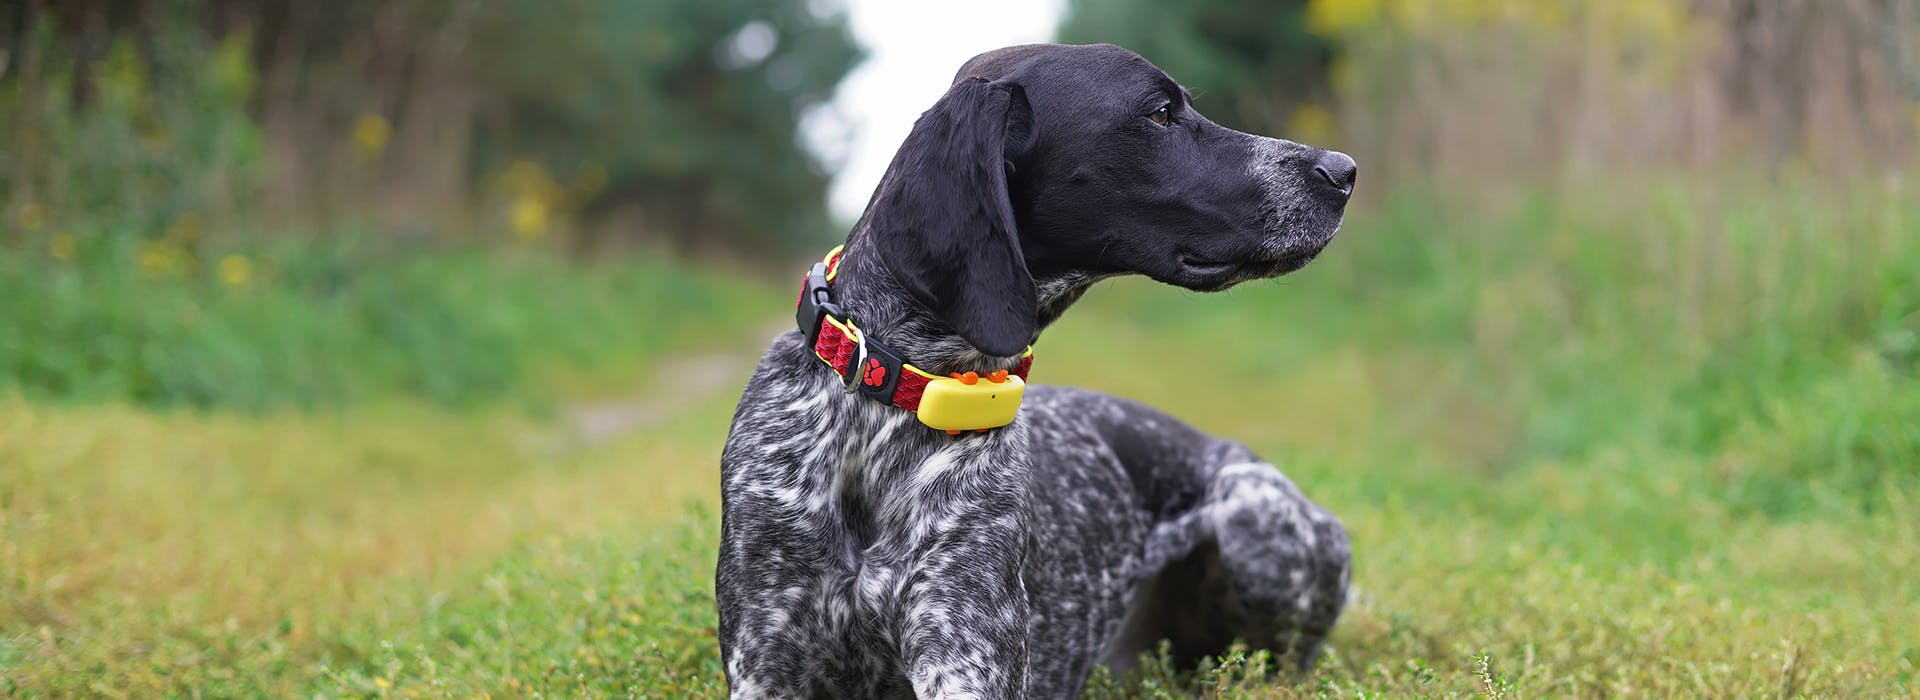 A dog wearing a bright yellow gps tracking collar, sitting down on a field of grass